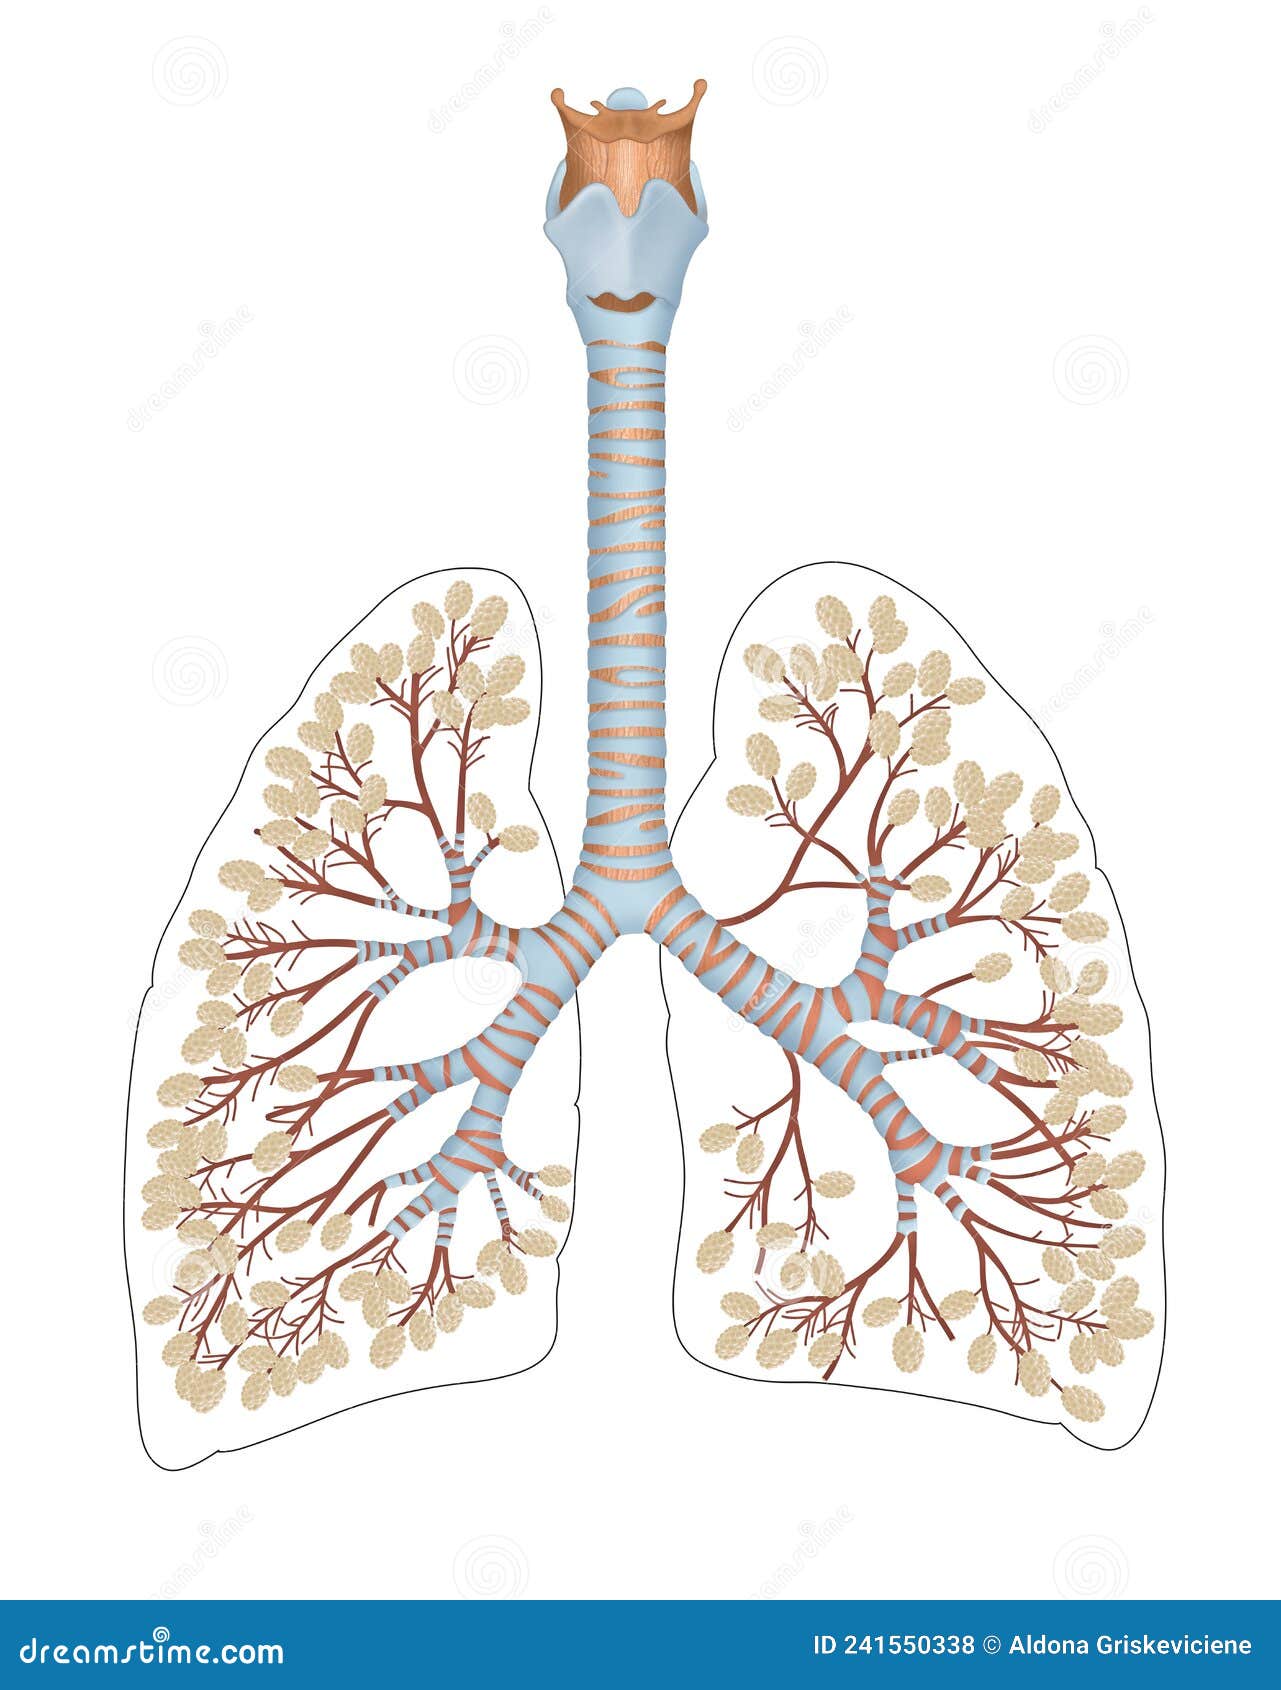 respiratory system is the network of organs and tissues that help you breathe